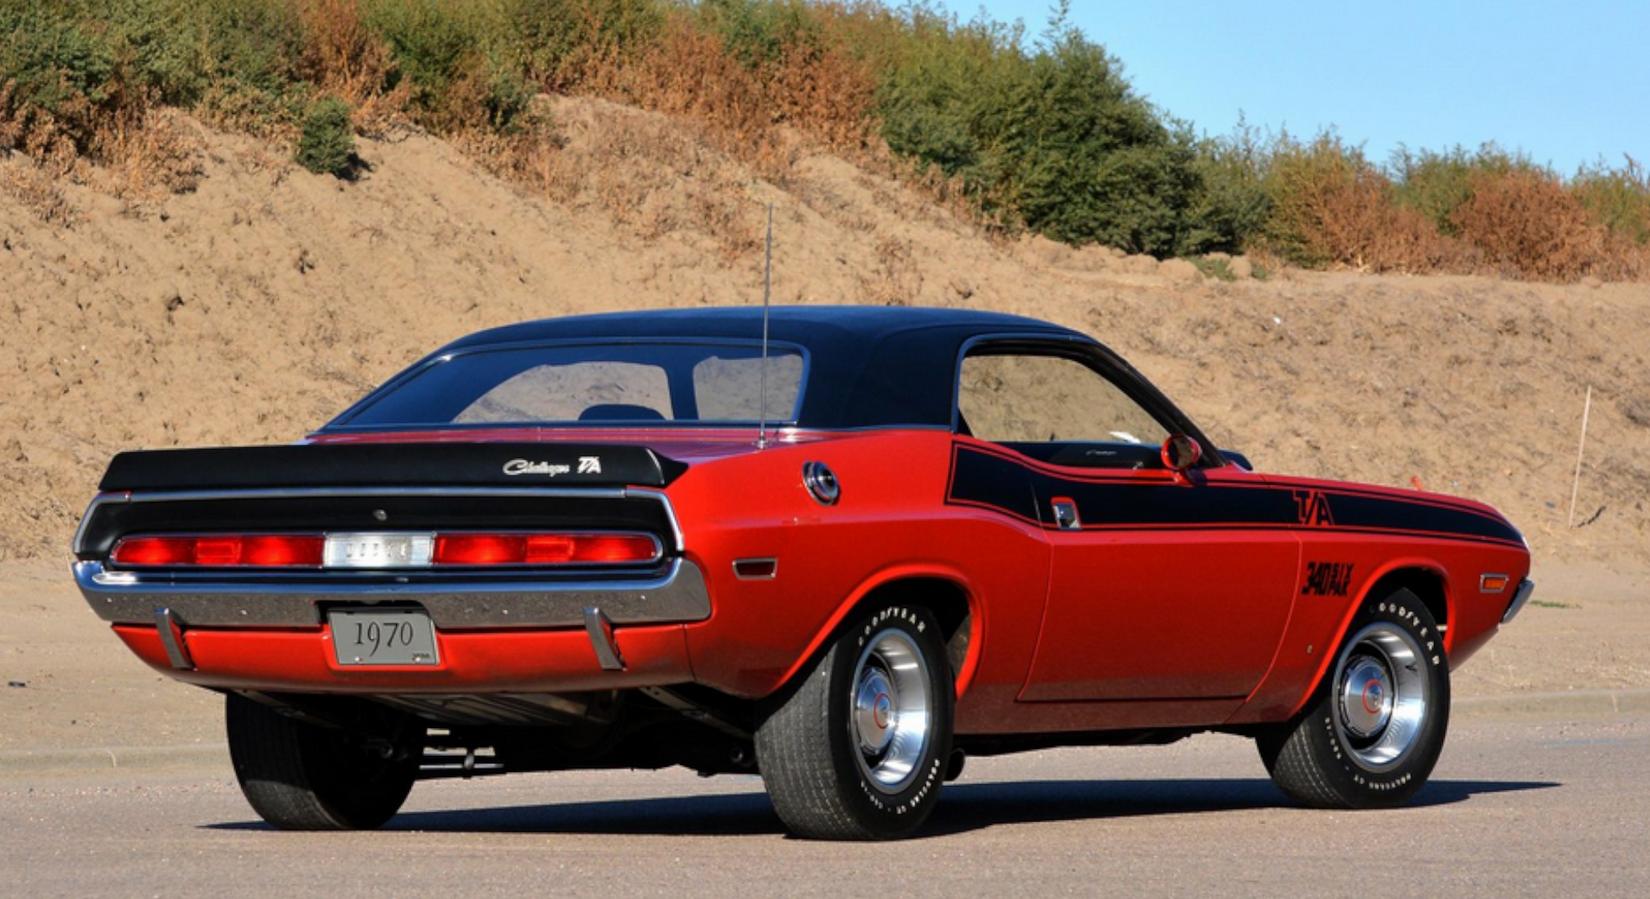 1970 Dodge Challenger rear in Bright Red